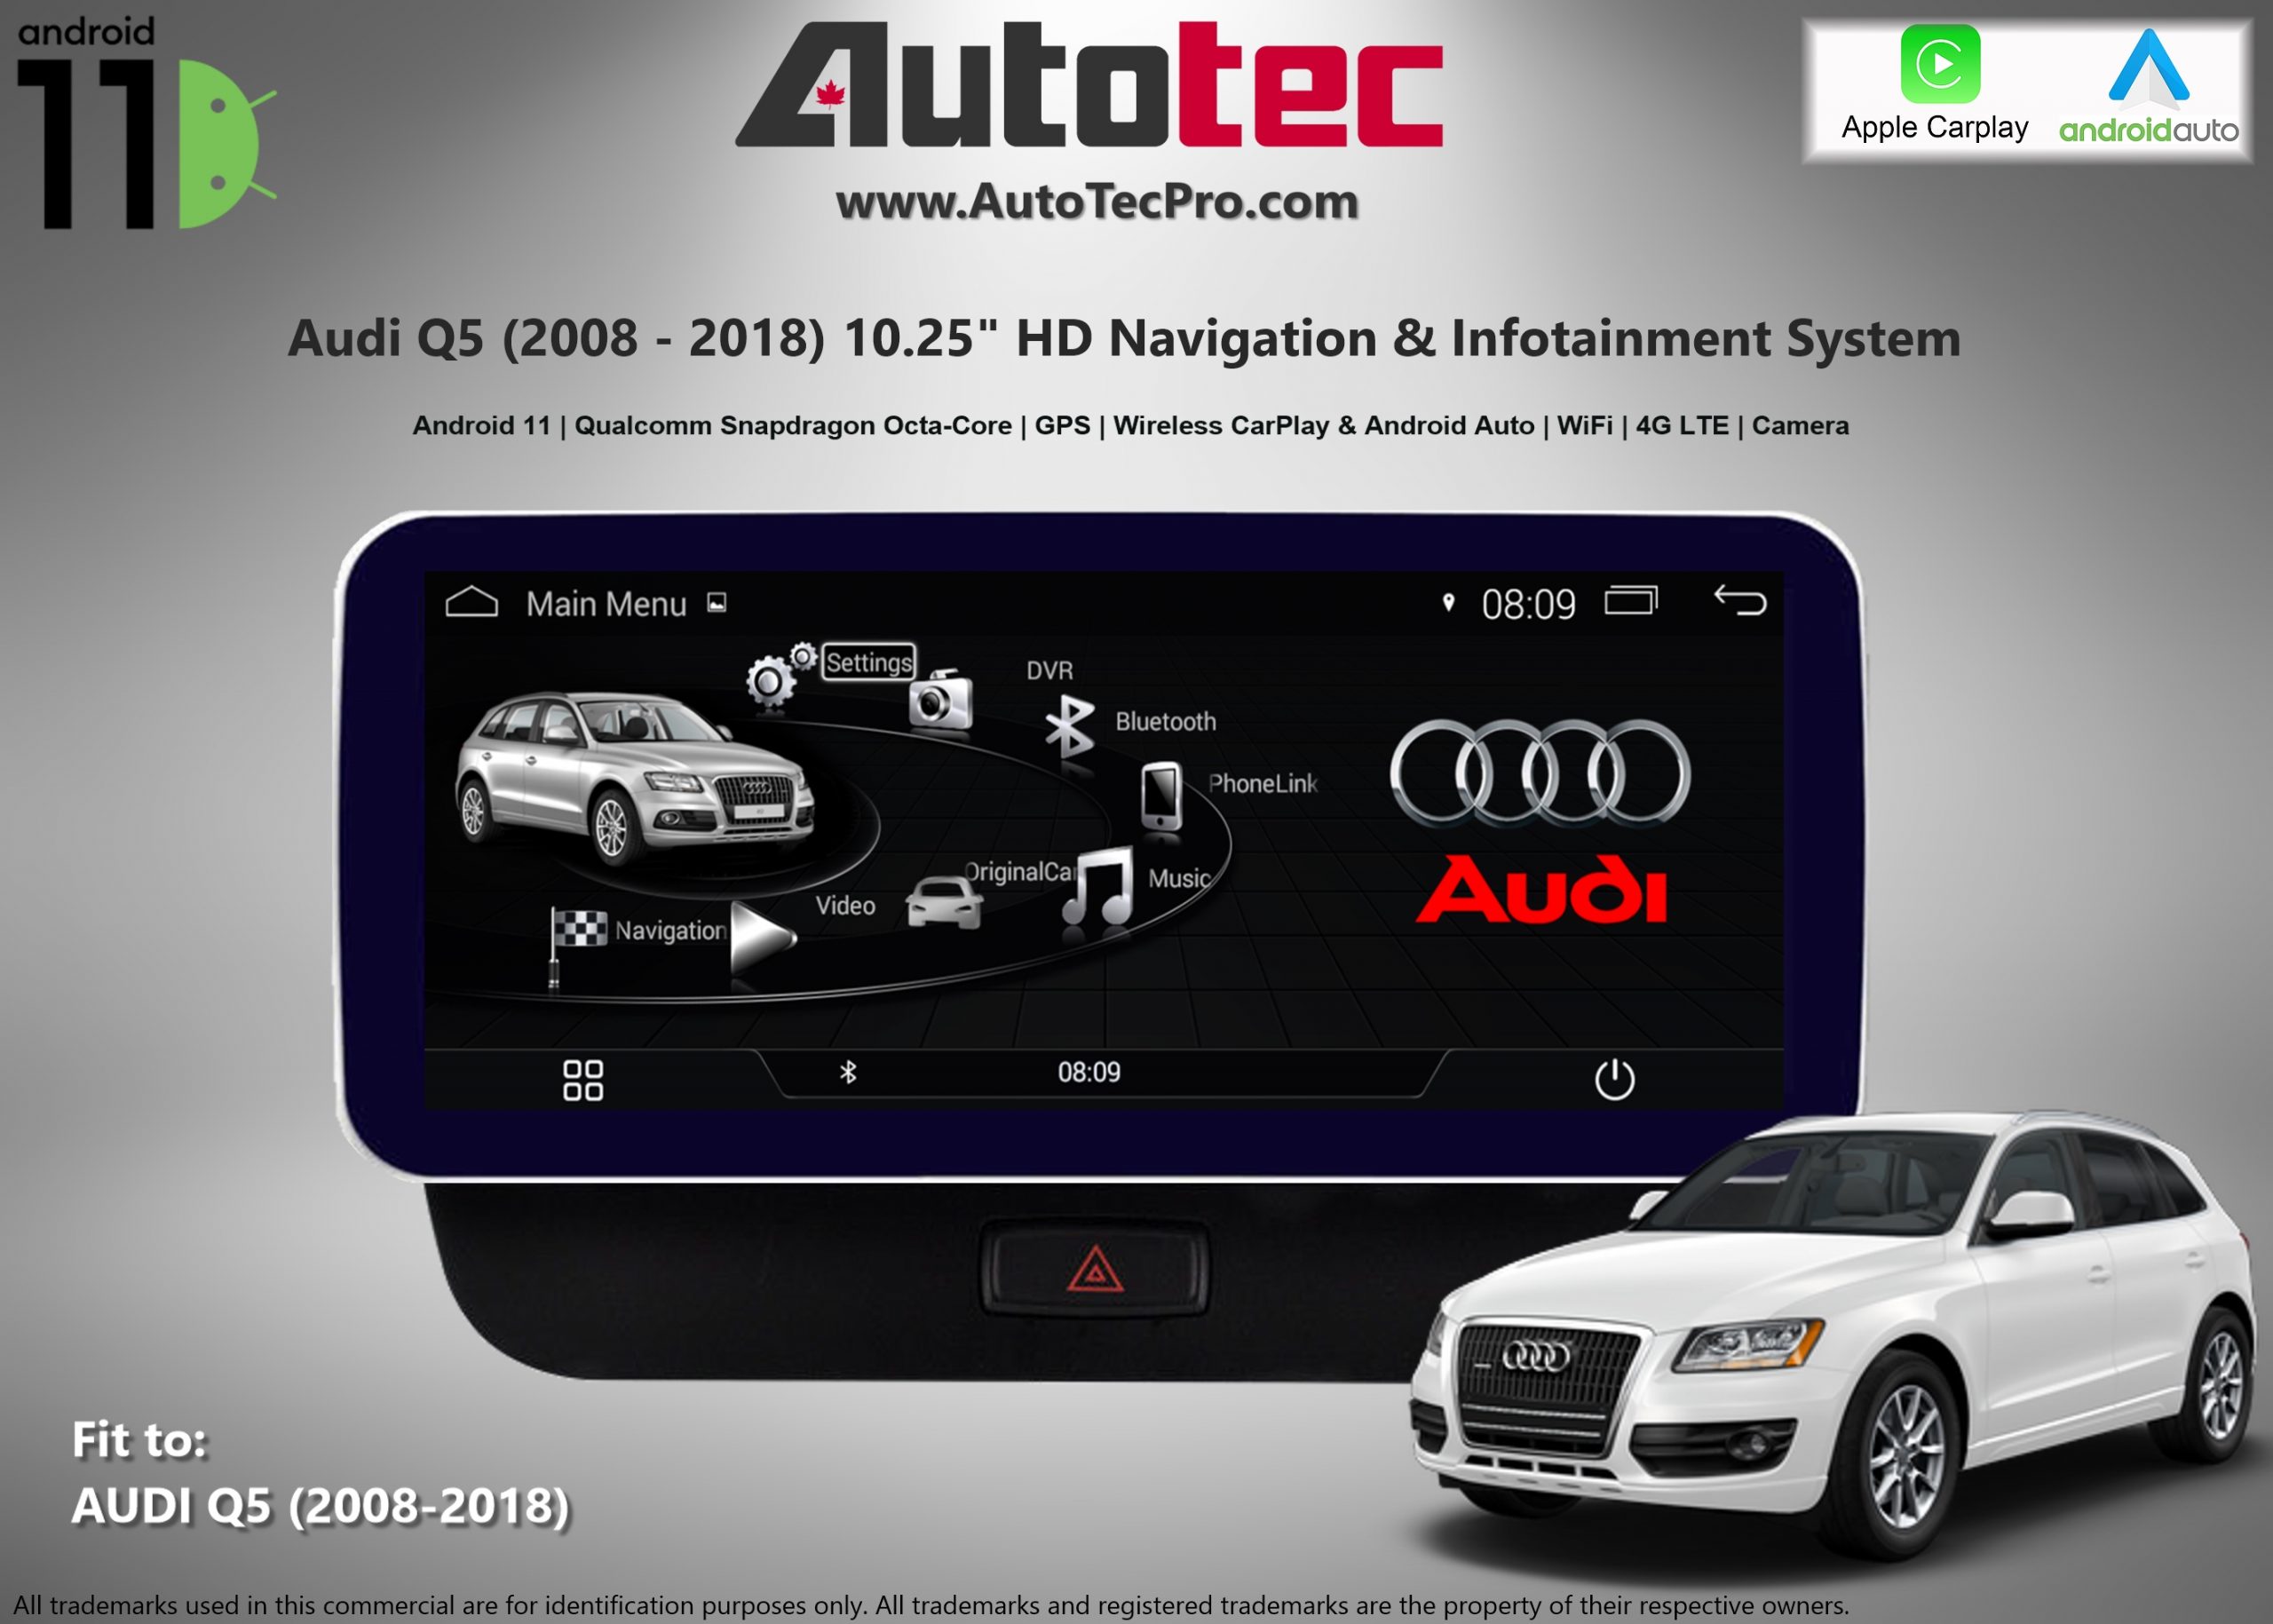 Wit-Up Audi Q5 8R (2009-2015) LHD MMI 12.3 Touchscreen GPS Navi Autor –  Wit-Up CarPlay Android Screen Upgrade